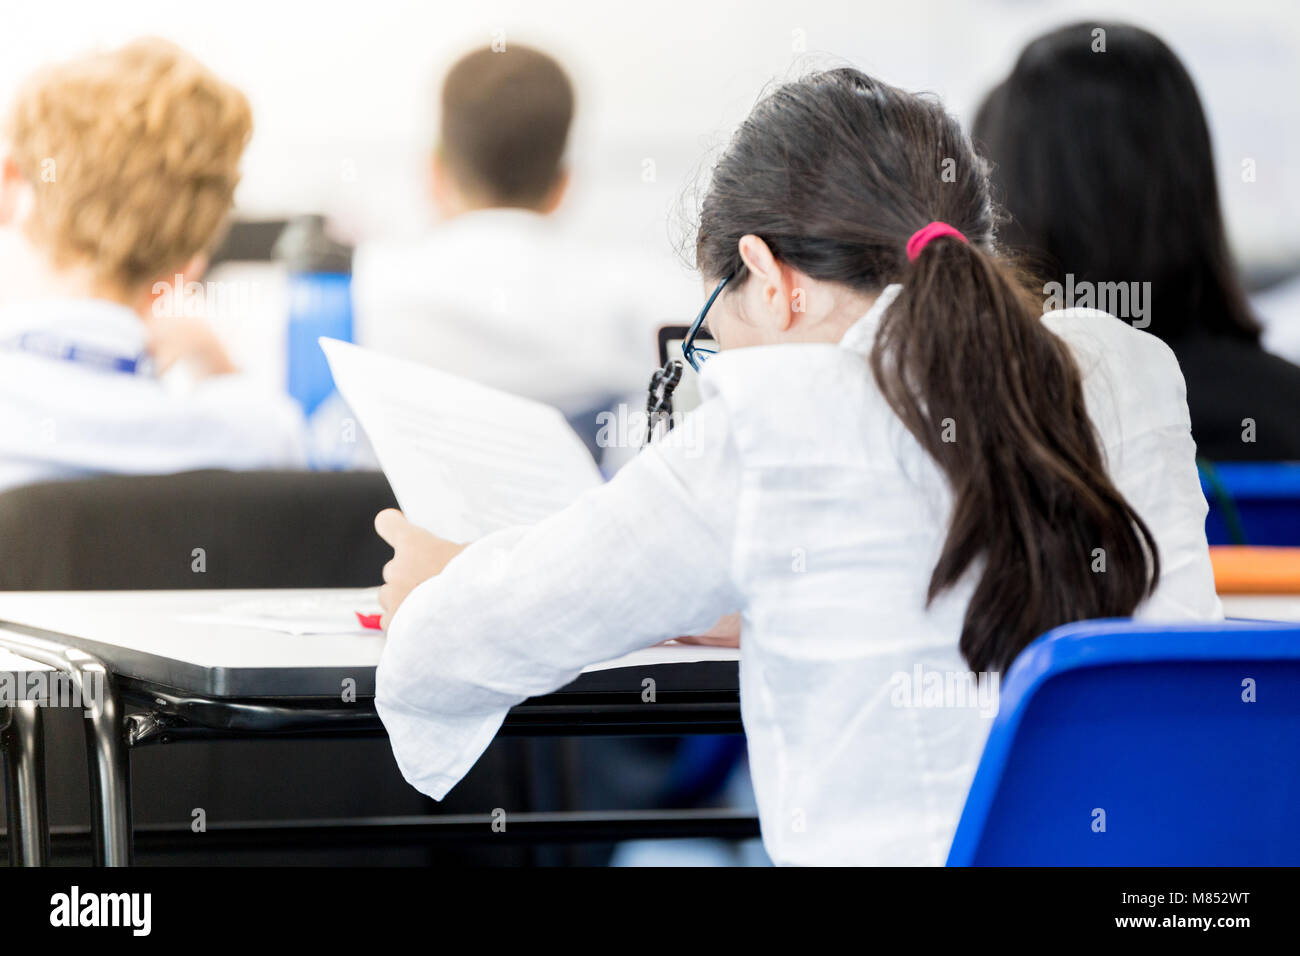 Multi ethnic studentst studying hard in class Stock Photo